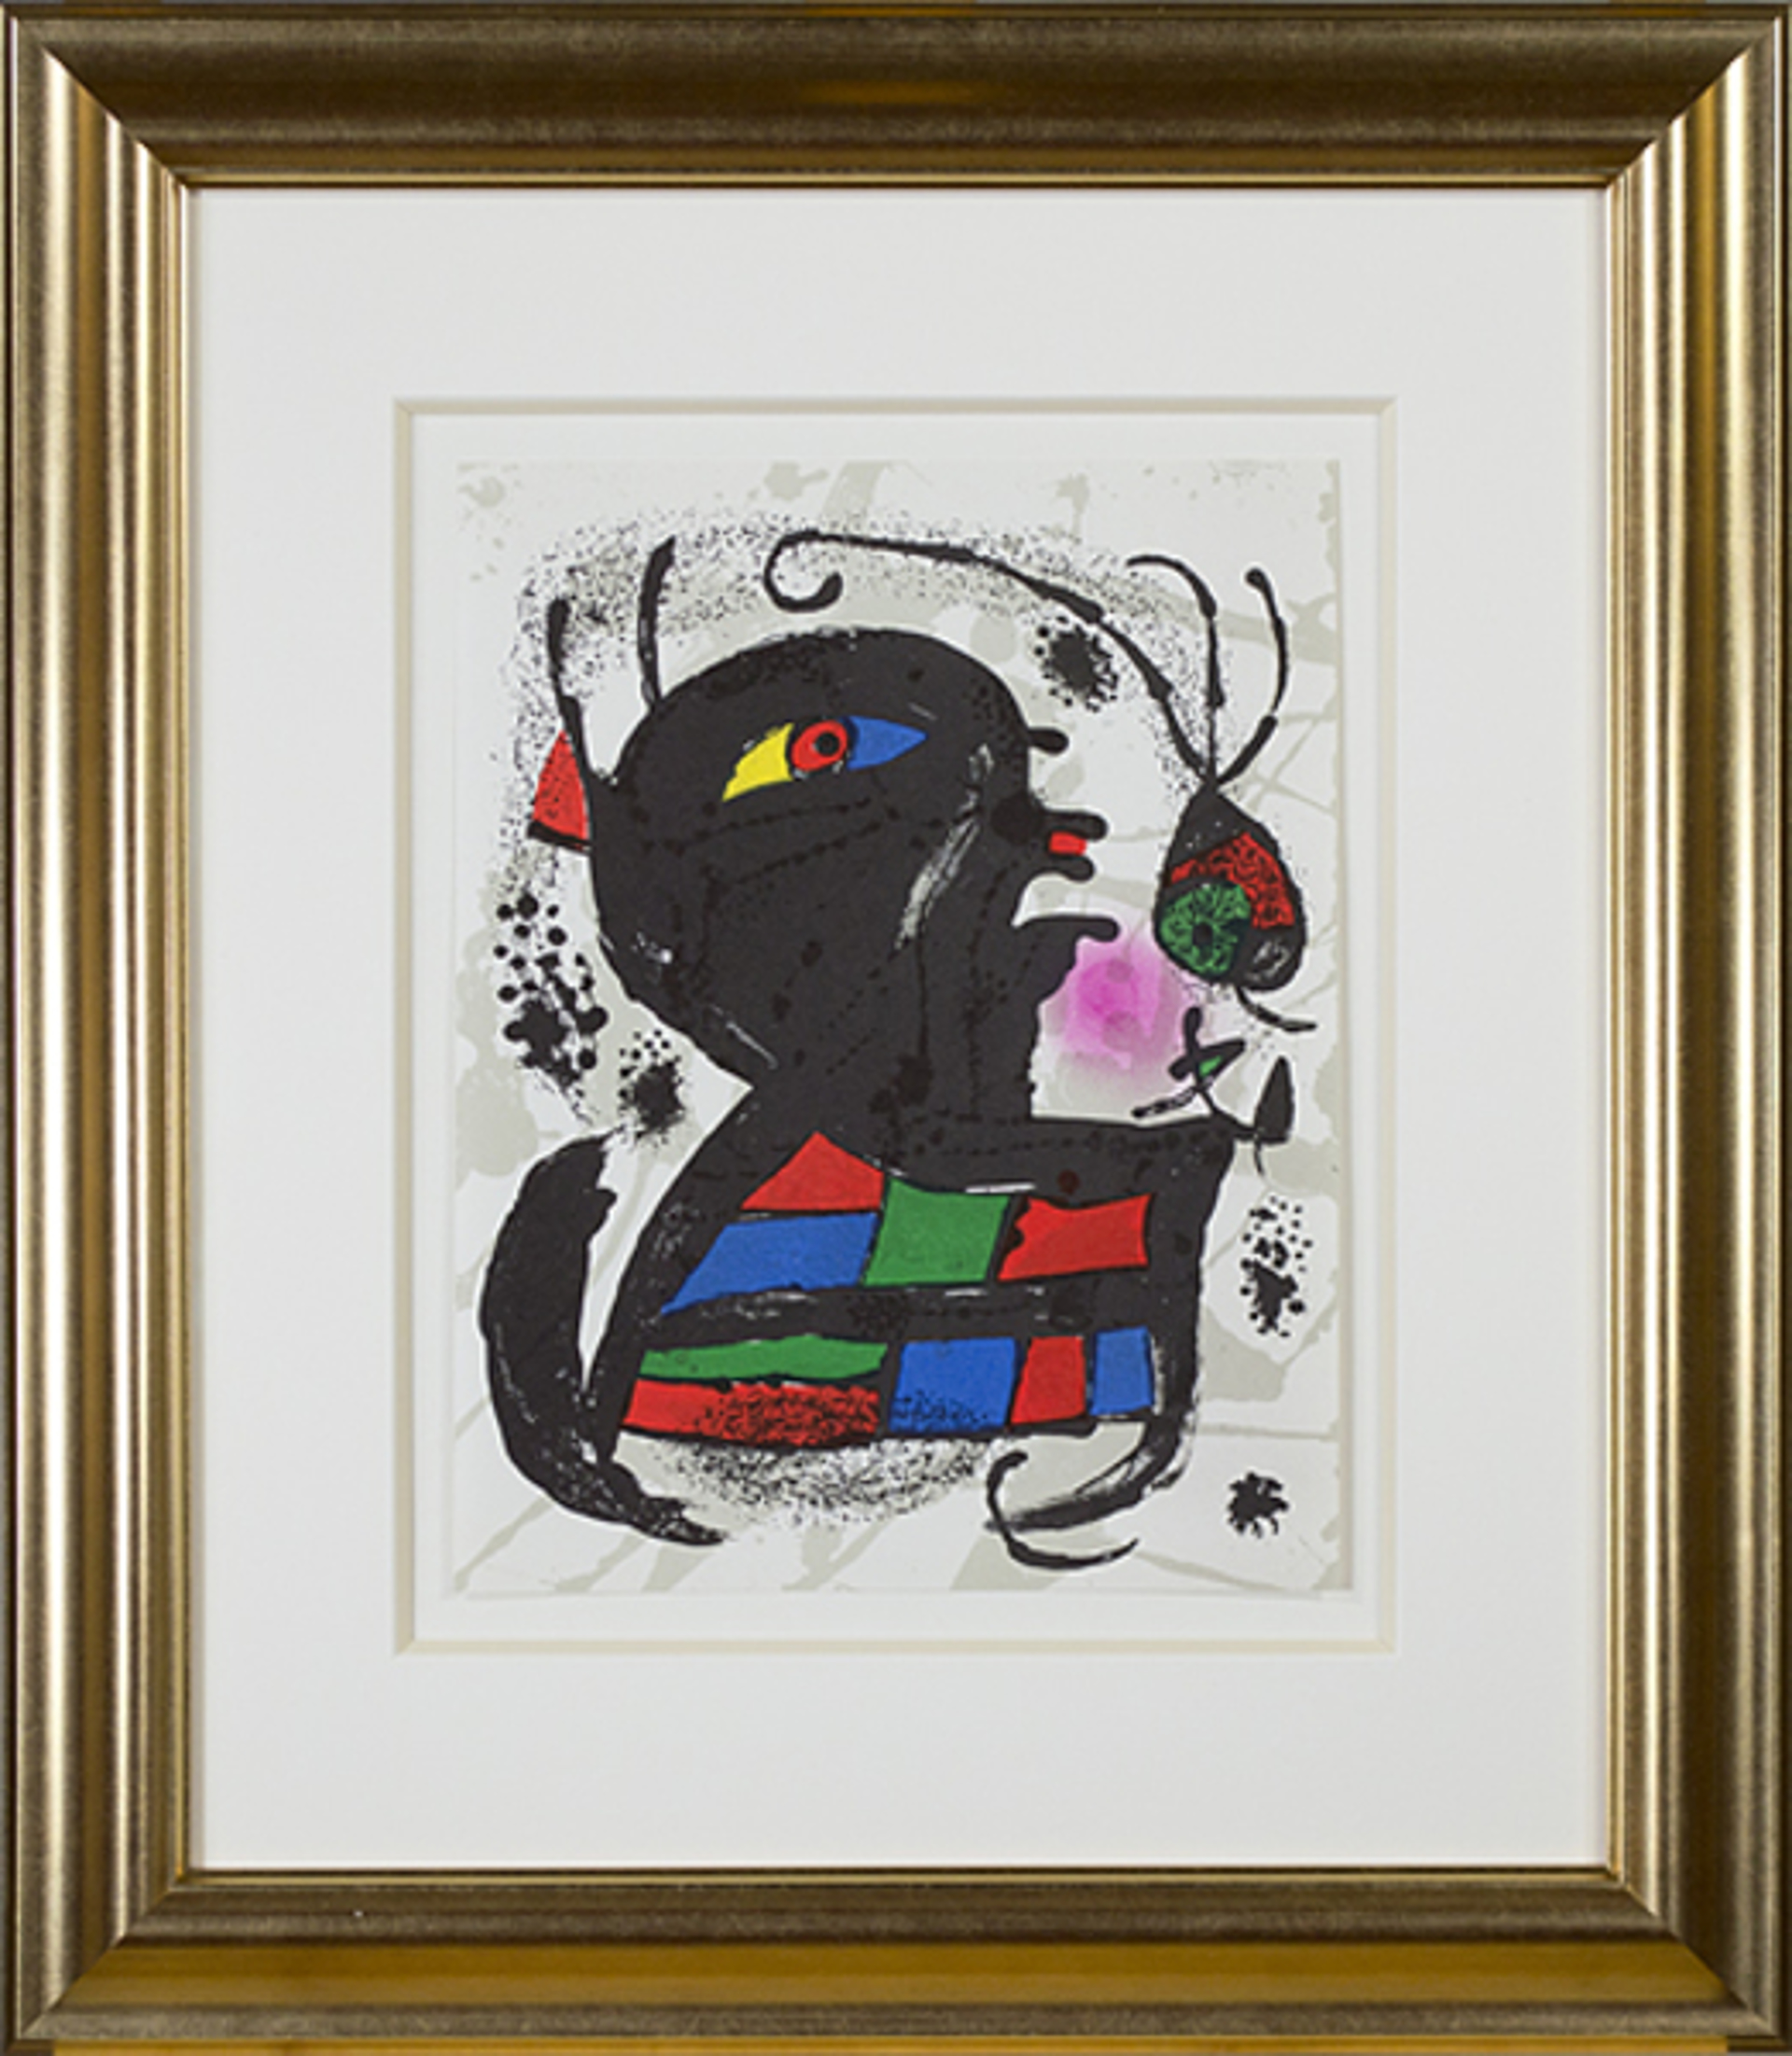 Original Lithograph V from "Miro Lithographs III, Maeght Publisher" by Joan Miró